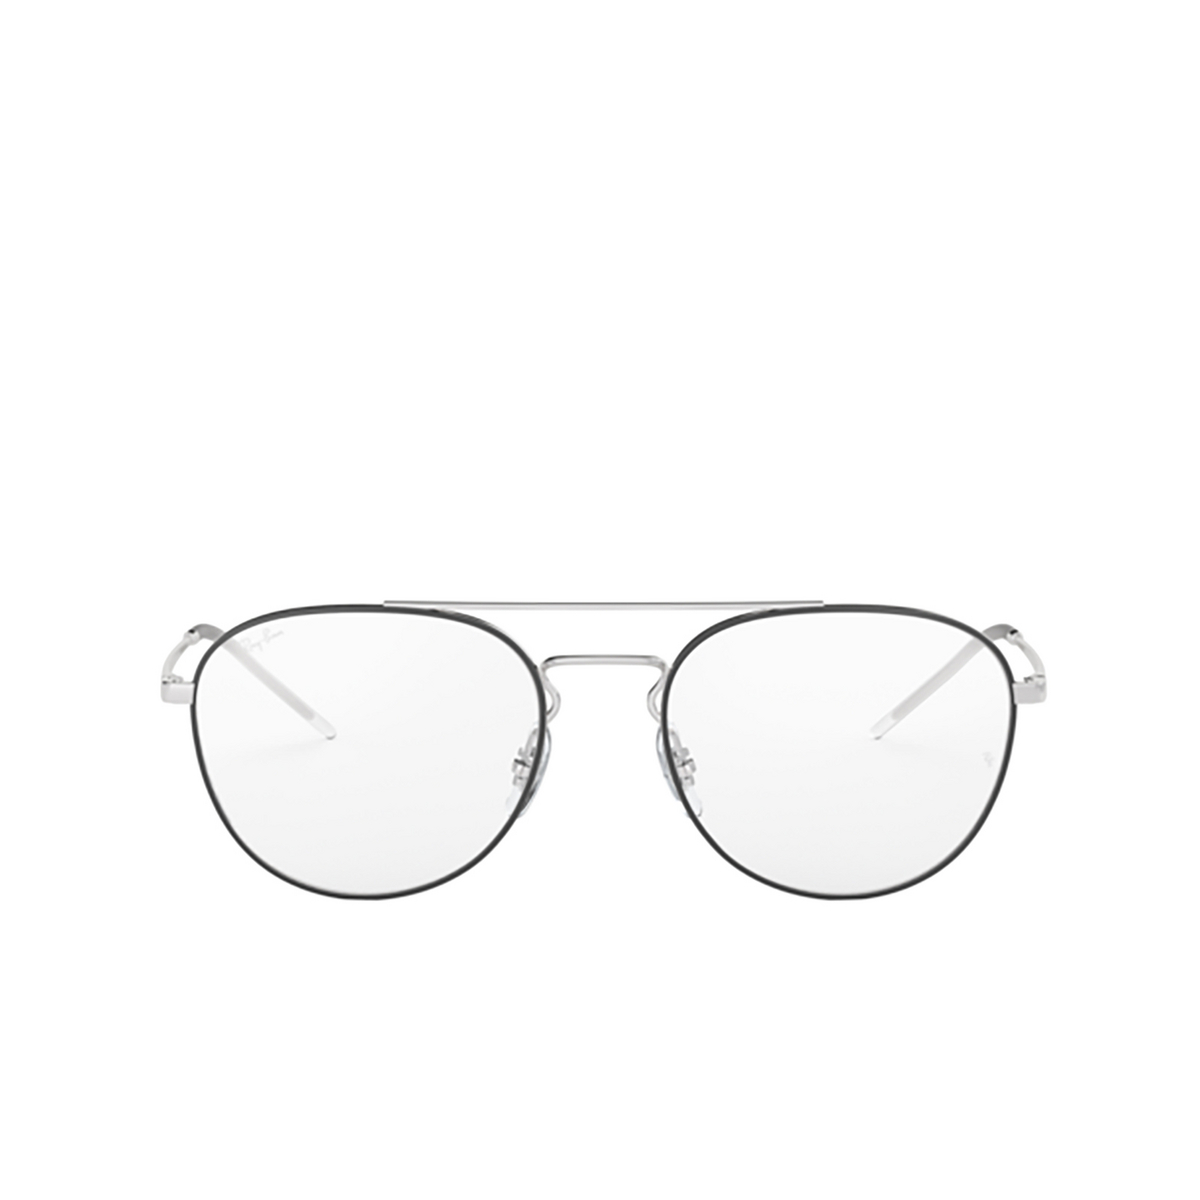 Ray-Ban® Aviator Eyeglasses: RX6414 color Black On Silver 2983 - front view.